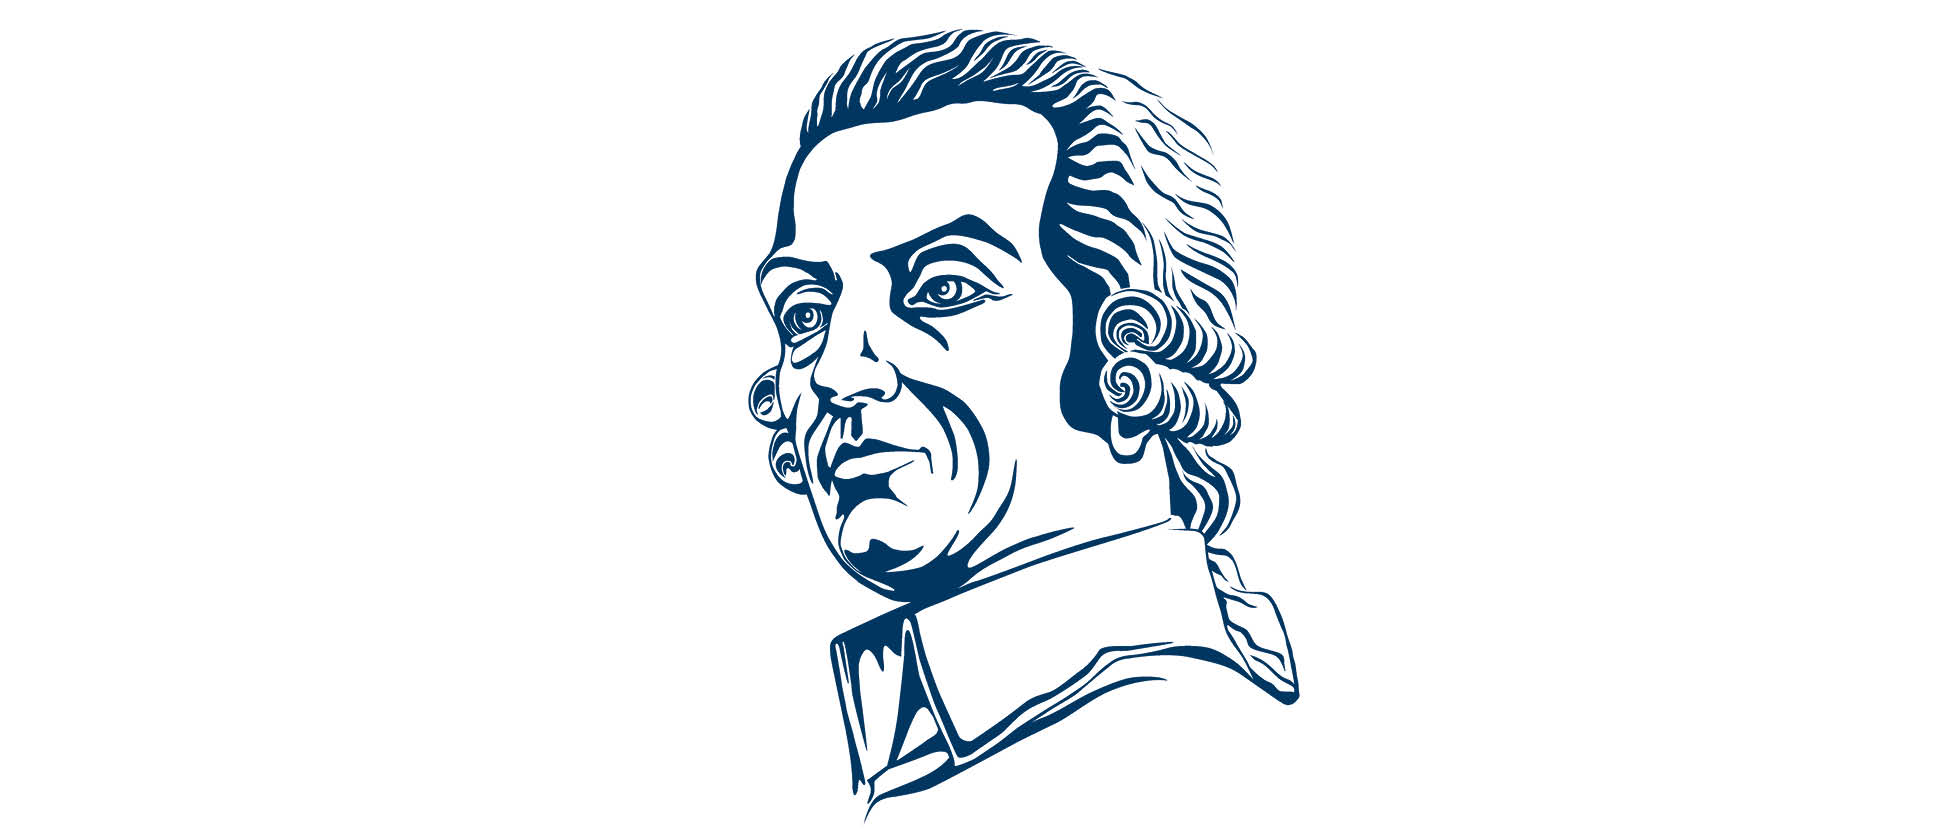 Drawing of Adam Smith's profile in blue on a white background